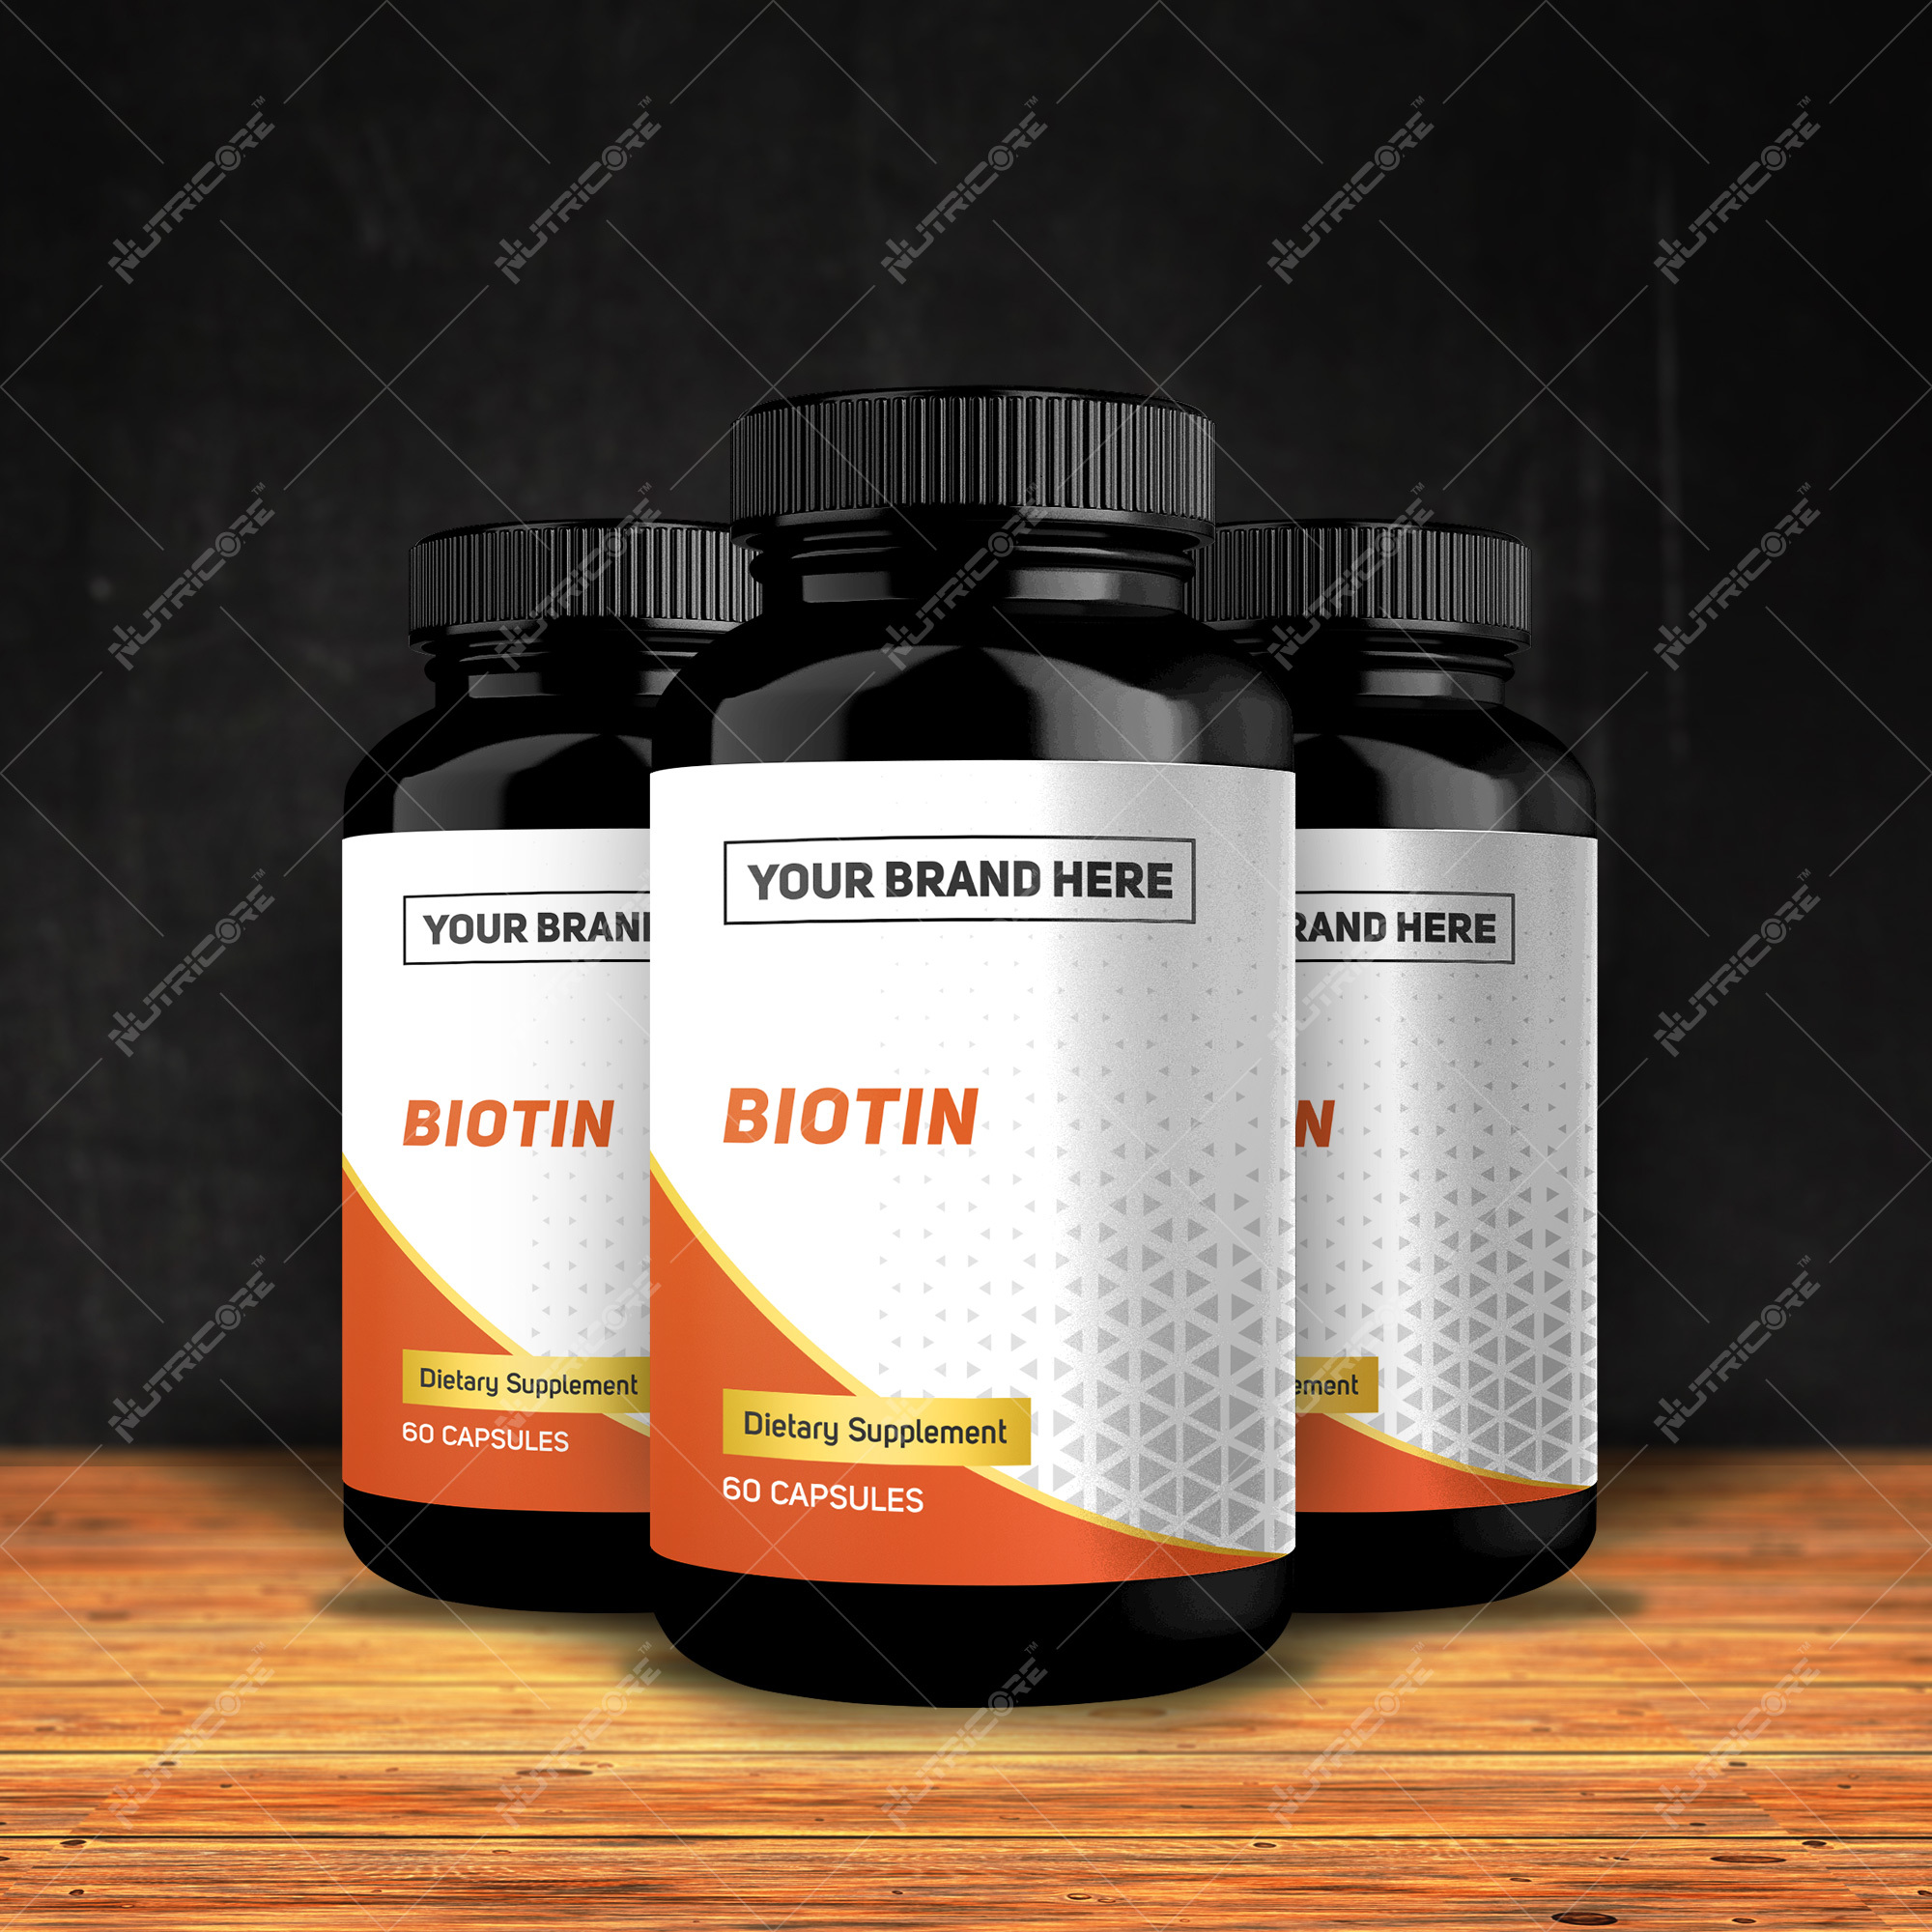 Contract Manufacturing for Biotin